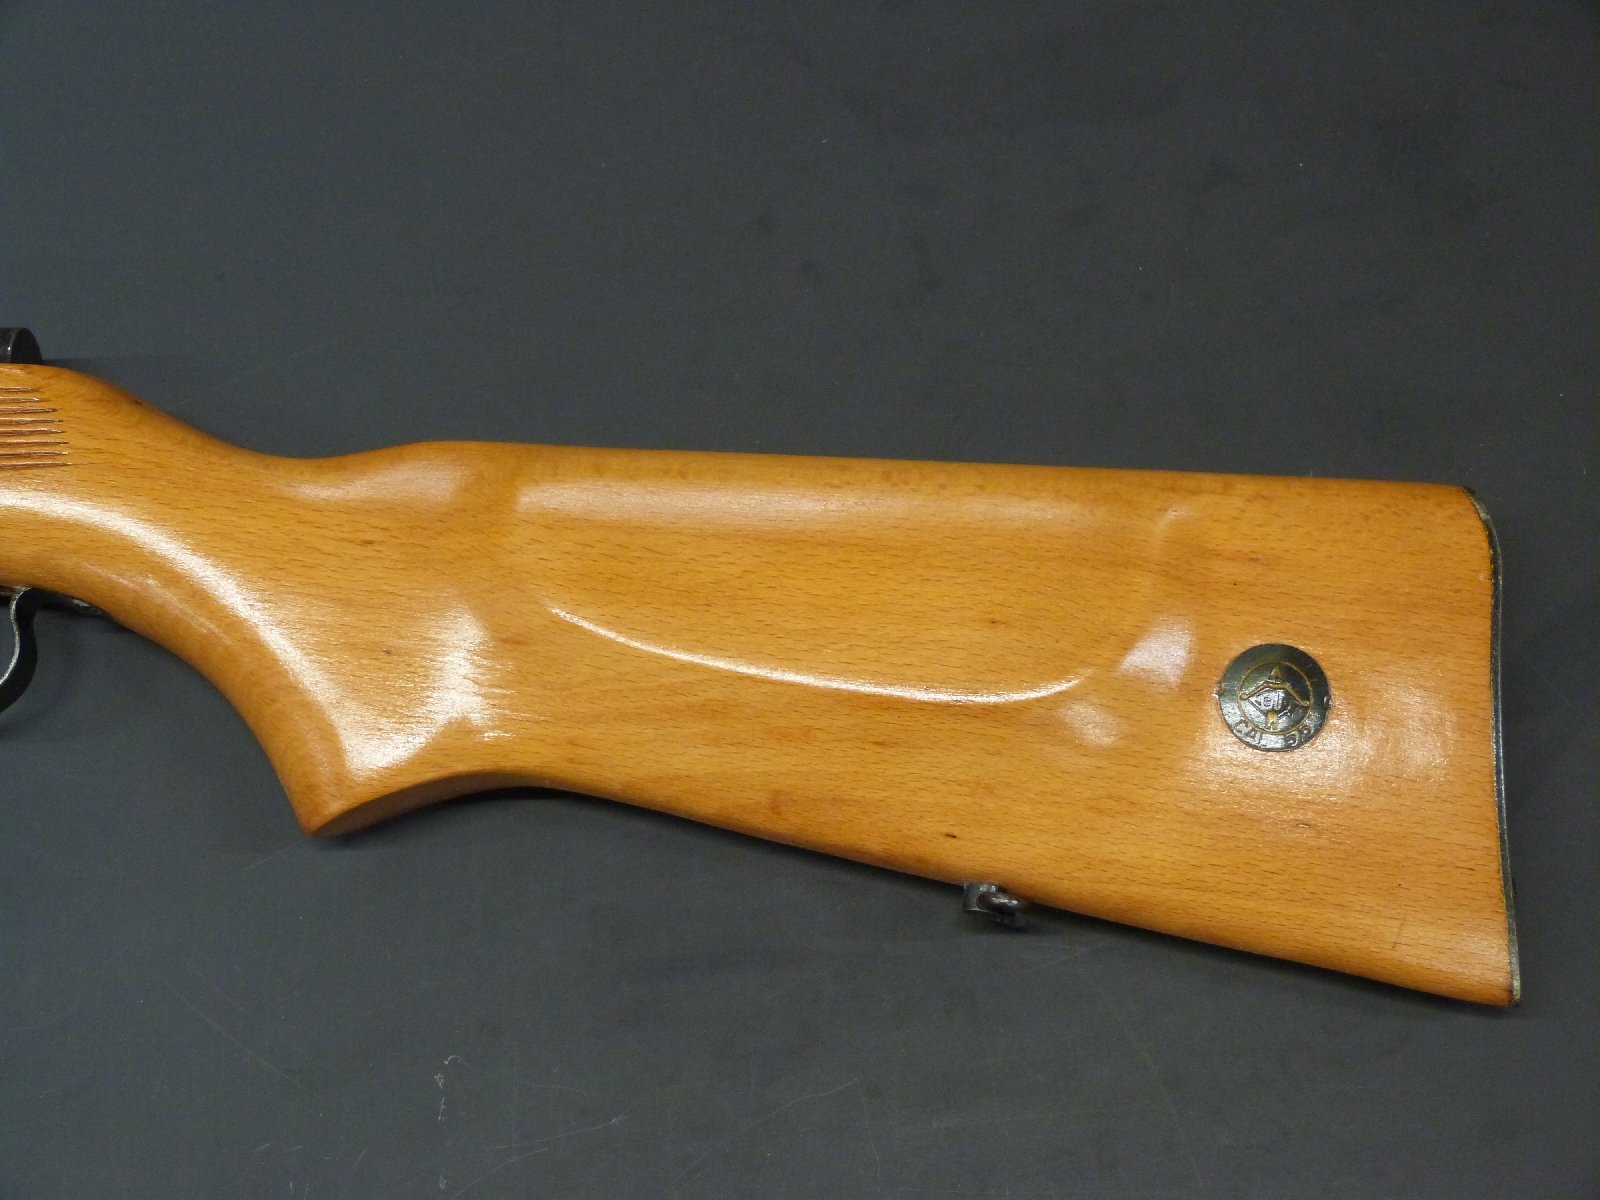 Relum Telly .22 air rifle with semi-pistol grip, raised cheek piece, sling suspension mounts and - Image 5 of 6